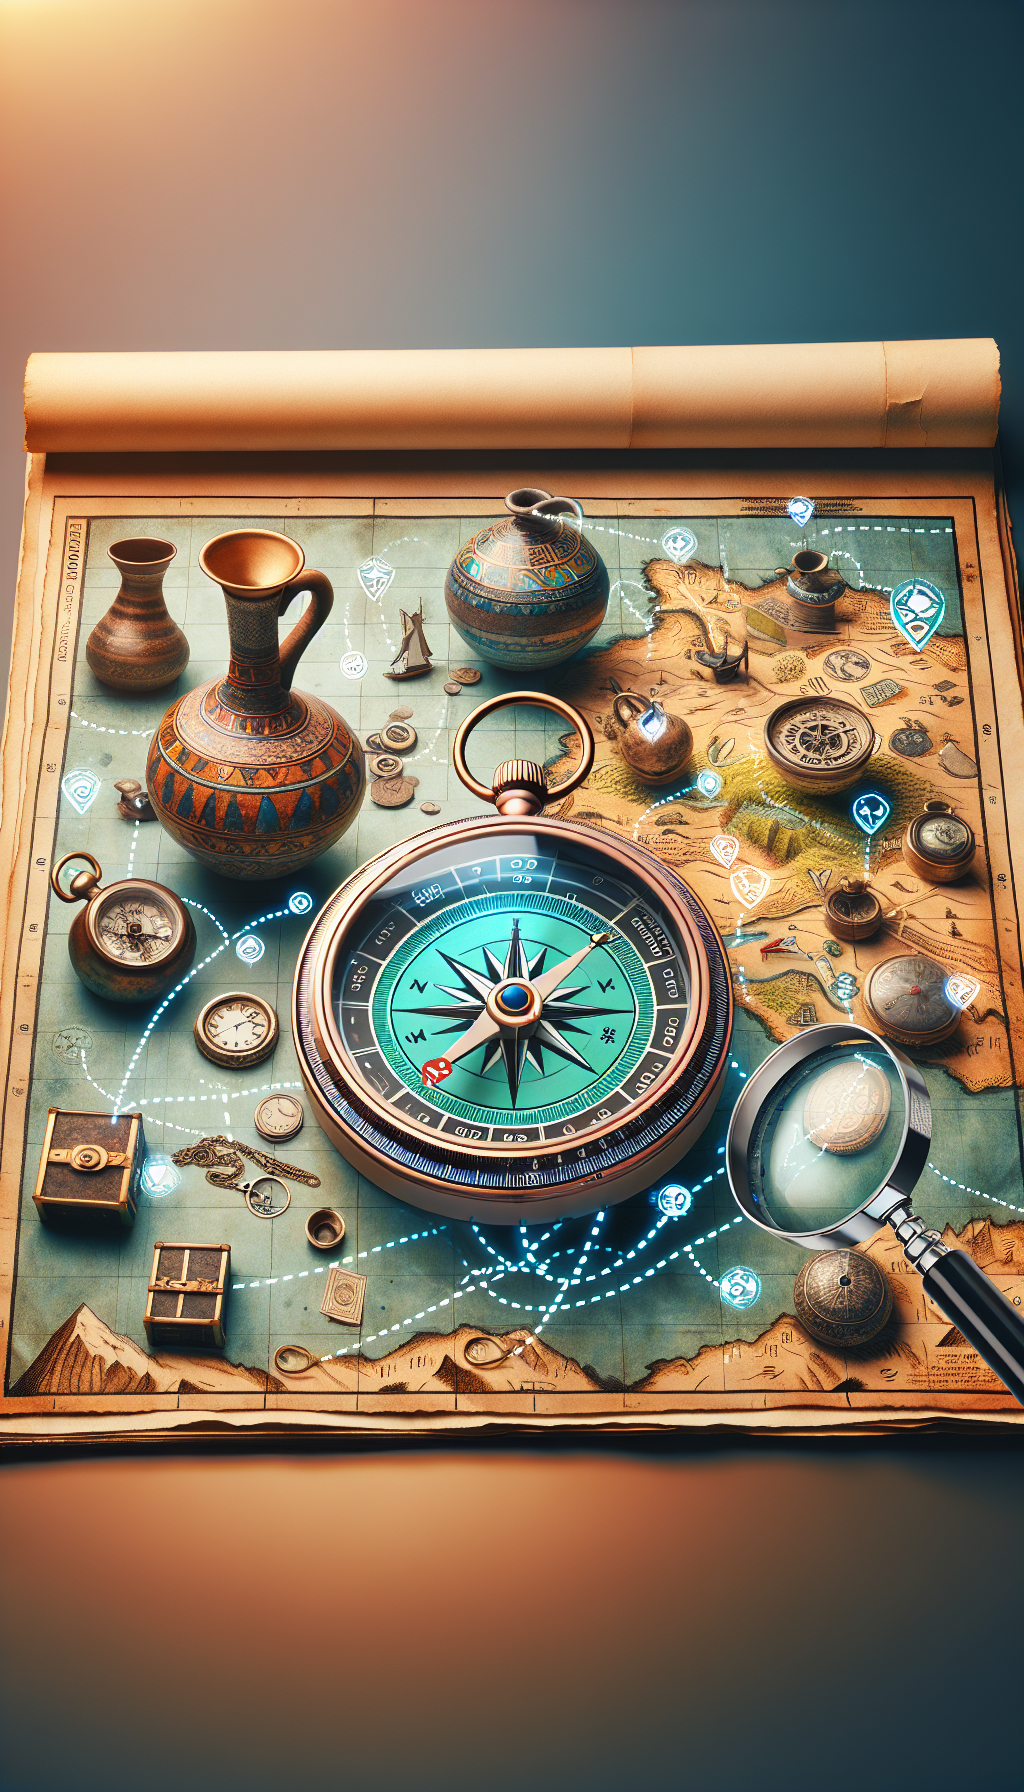 A digital compass overlaid on a classic treasure map unfurling across a desktop, with landmarks depicting major free appraisal platforms. Antique items like vases and watches glow with valuation figures while dotted paths lead to 'tips' and 'tricks' treasure chests. A magnifying glass highlighting 'reliable results' completes the navigational theme of antique exploration in the online appraisal sea.